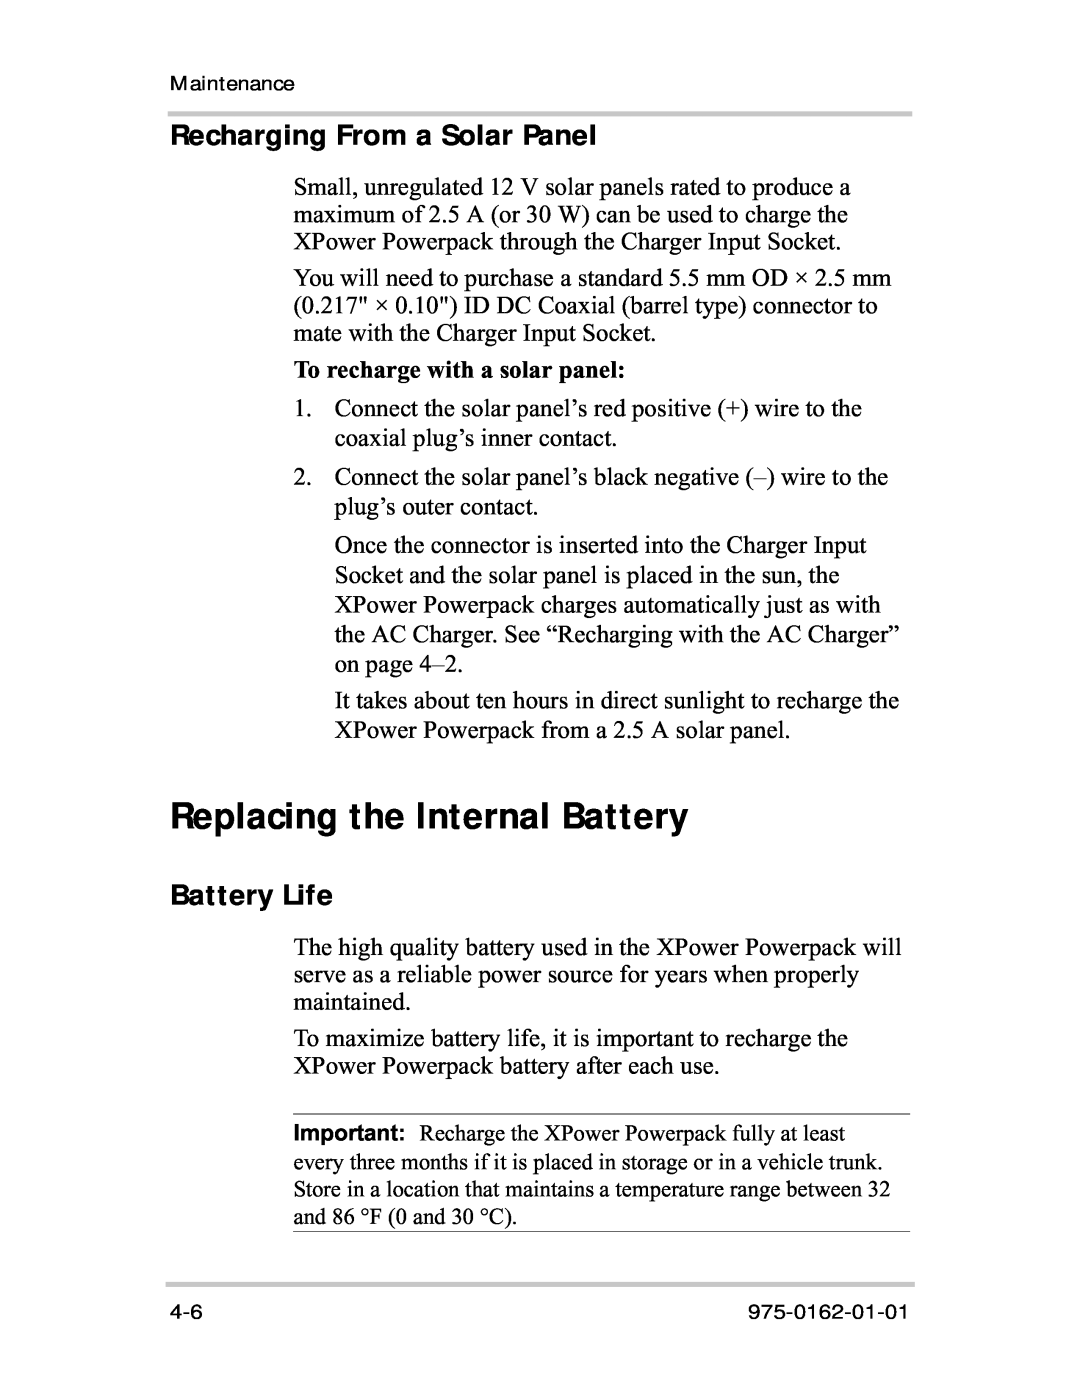 Xantrex Technology 400R manual Replacing the Internal Battery, Recharging From a Solar Panel, Battery Life 